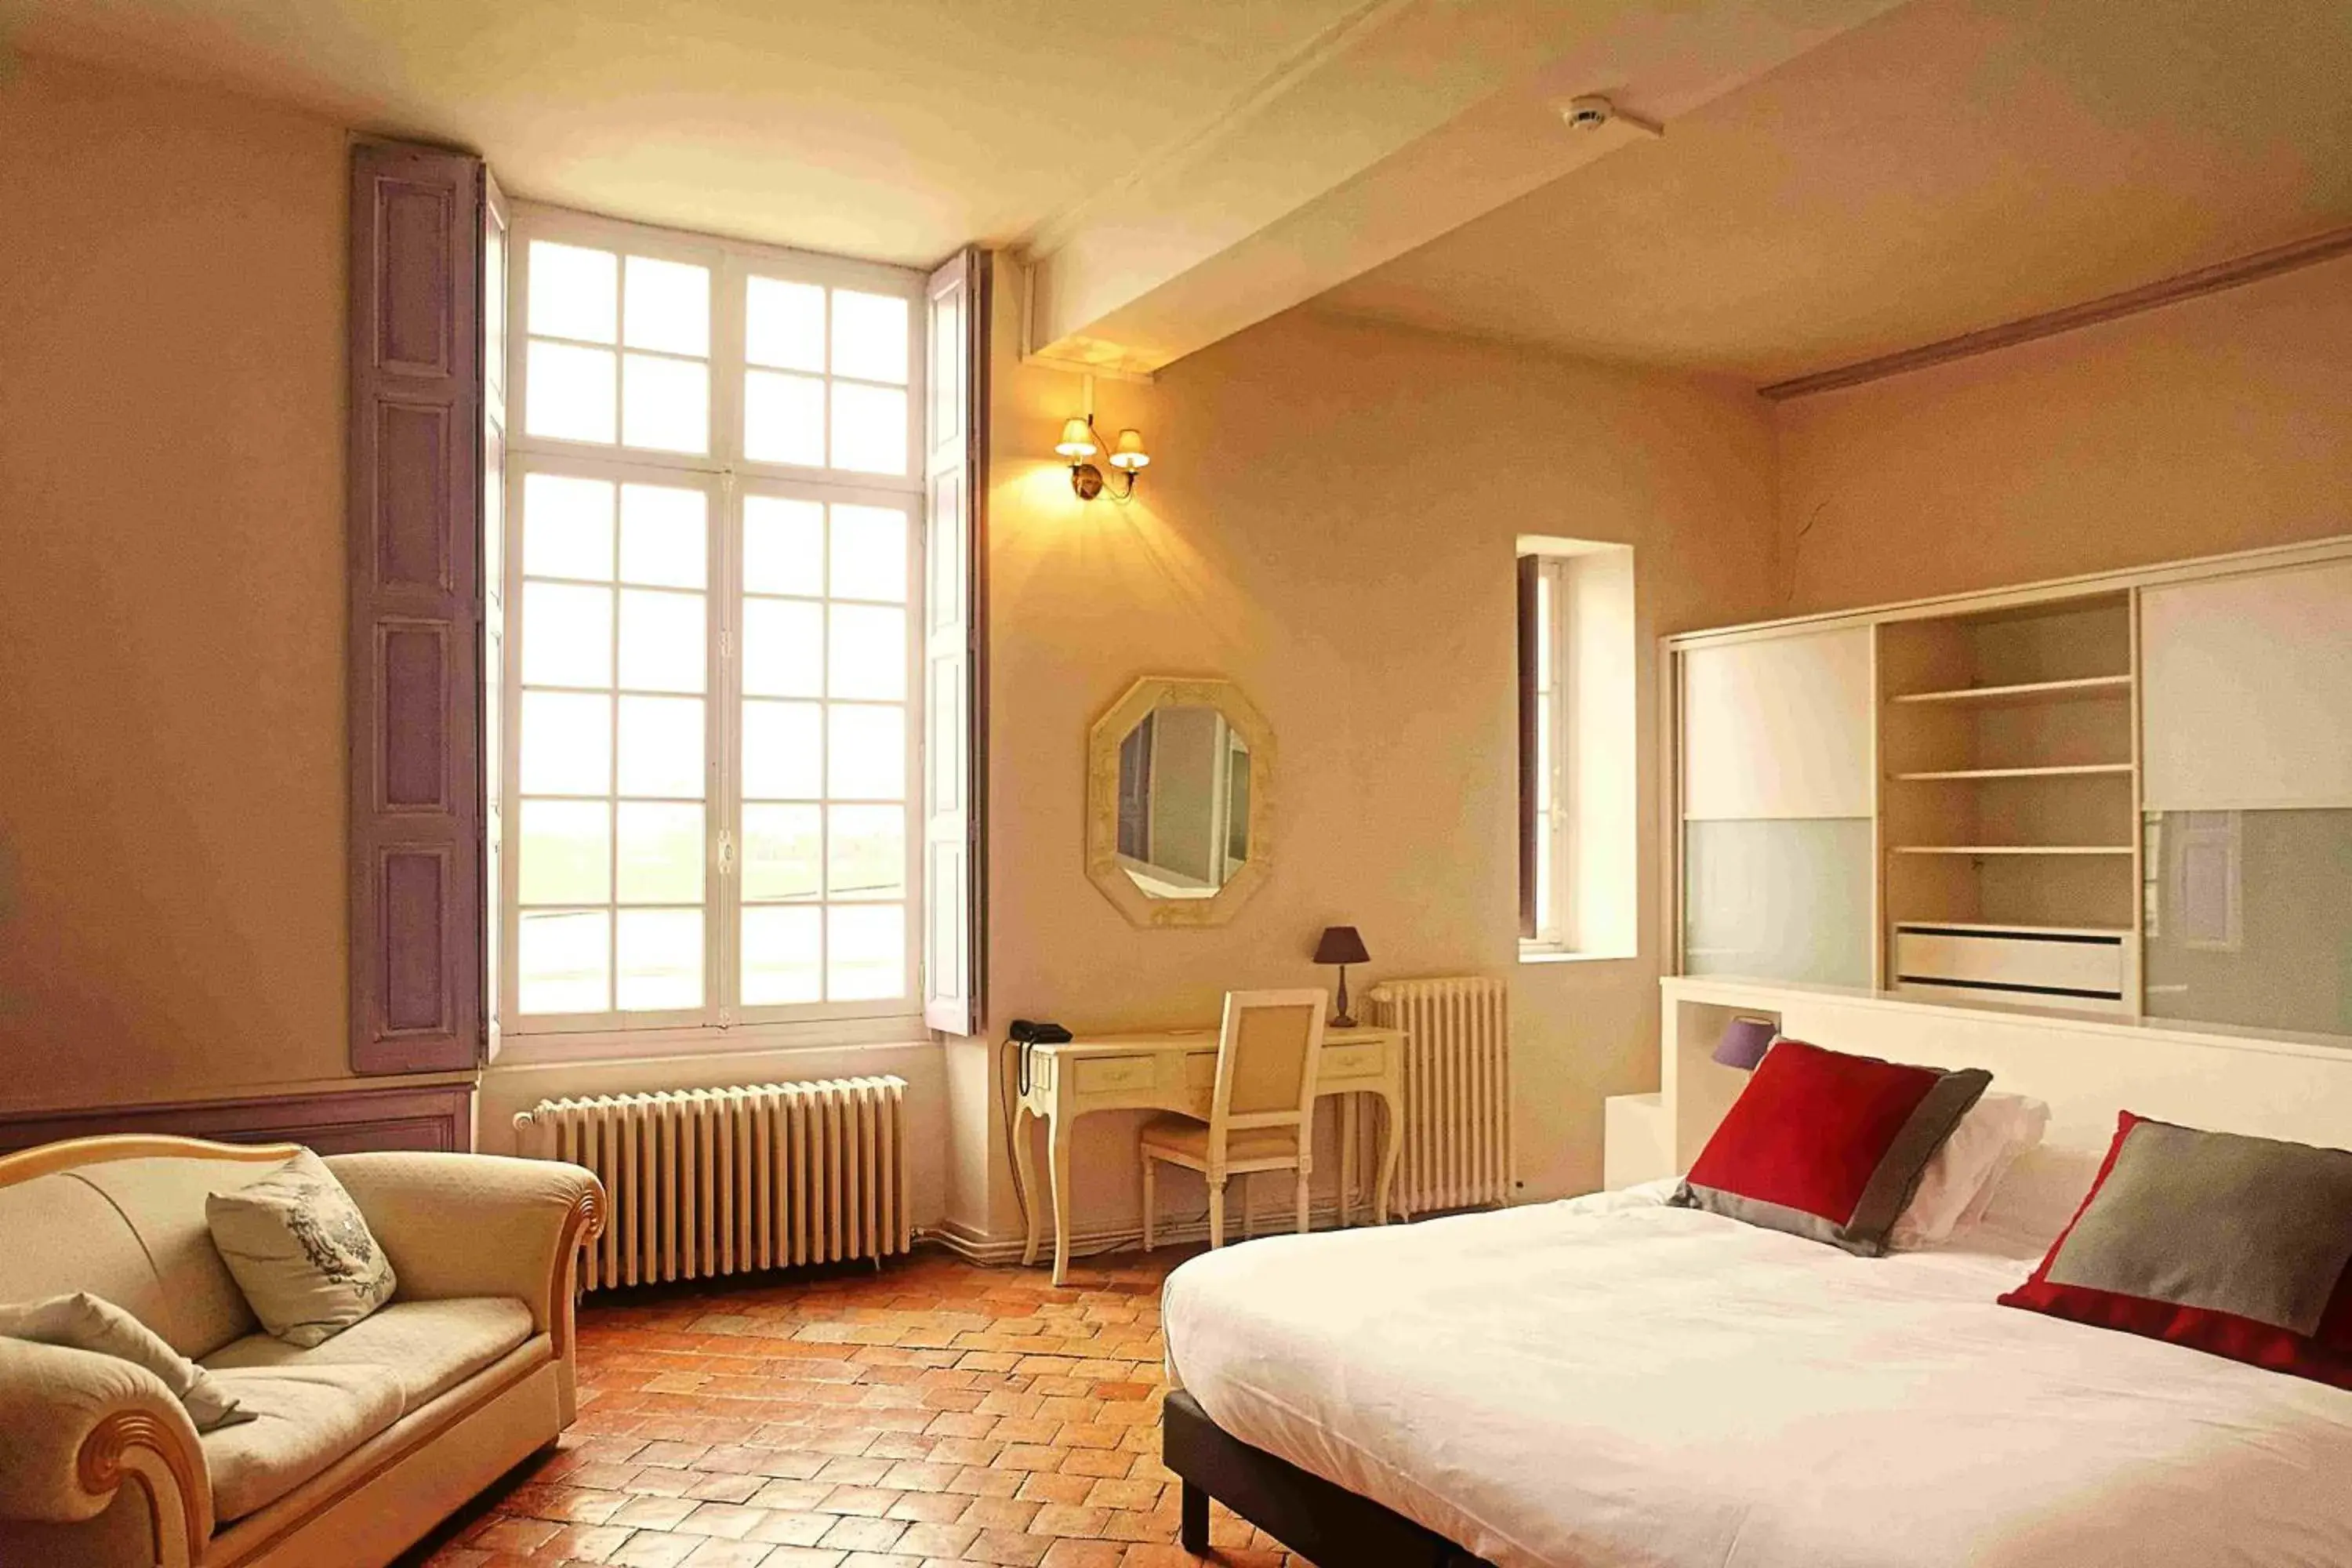 Day, Room Photo in Le Relais Louis XI